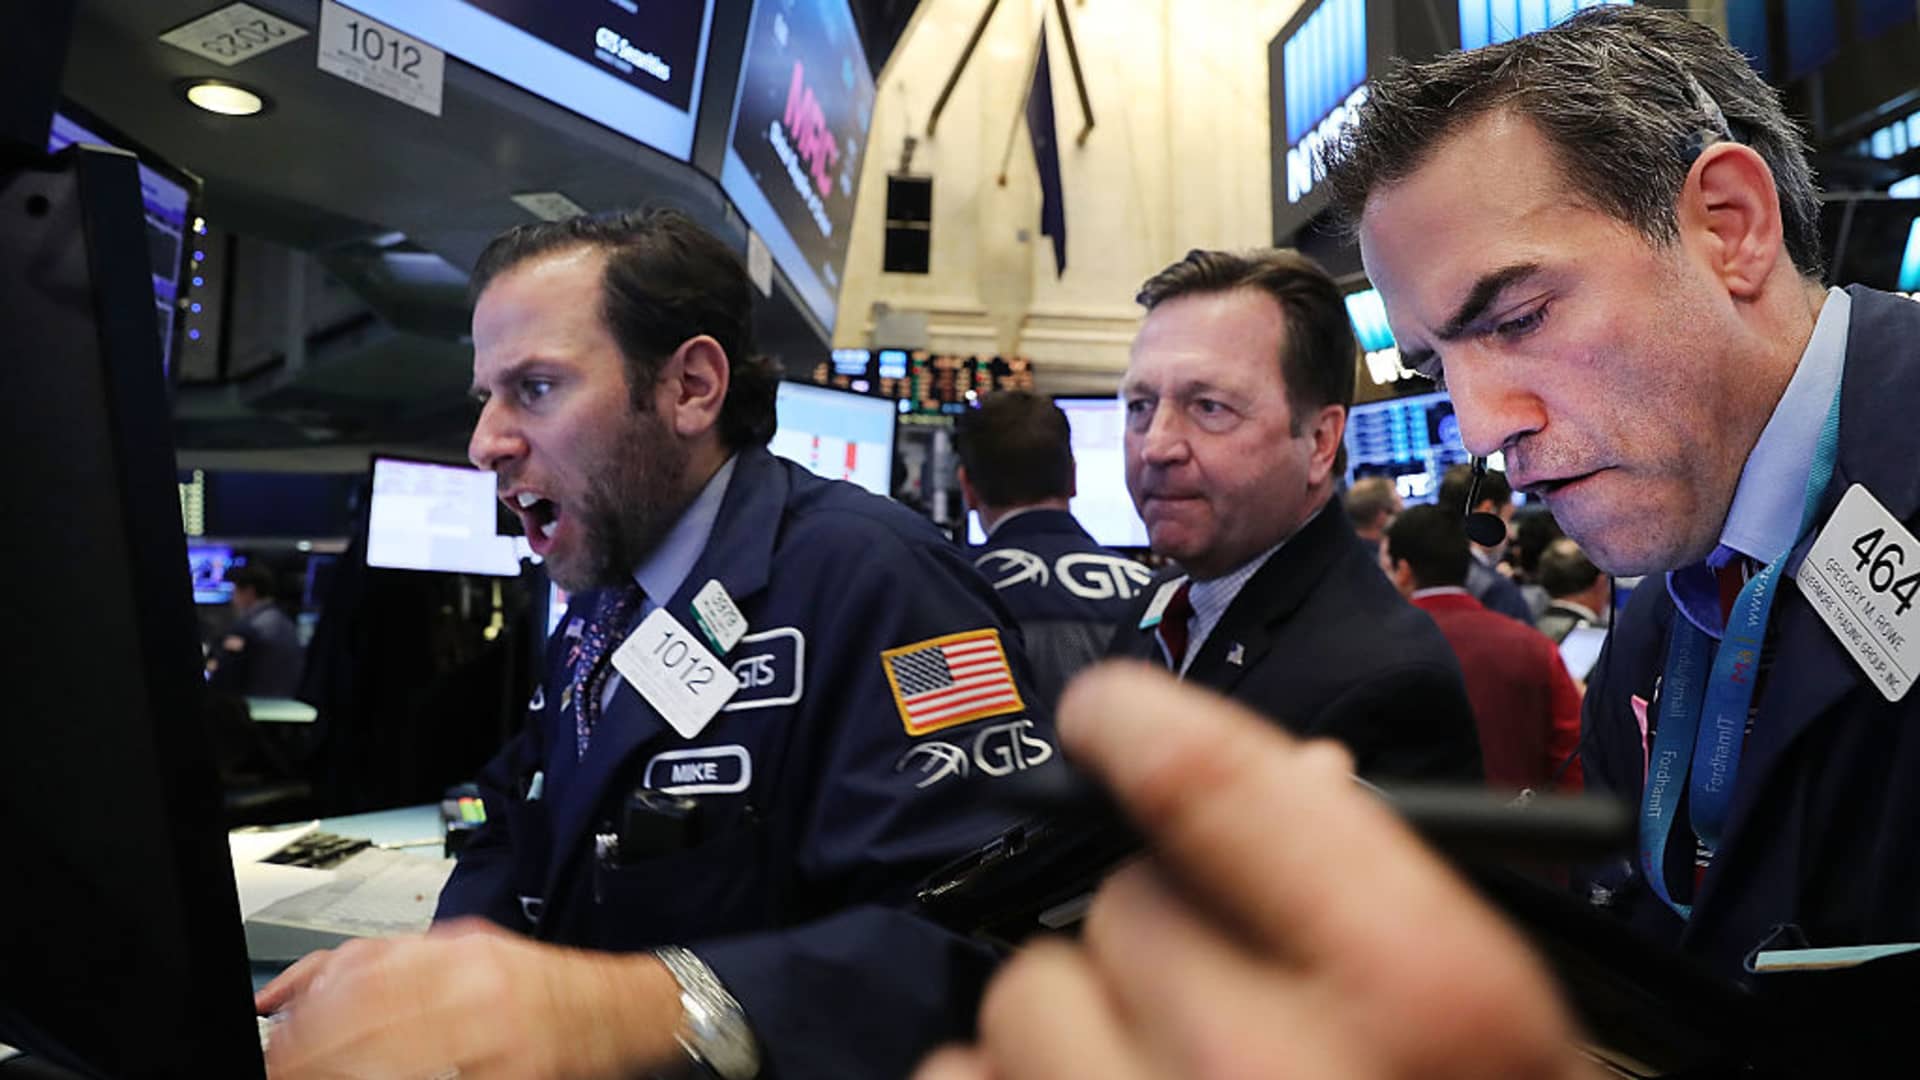 Dow closes nearly 400 points higher as Wall Street bets on easing inflation smaller rate hikes into year end – CNBC